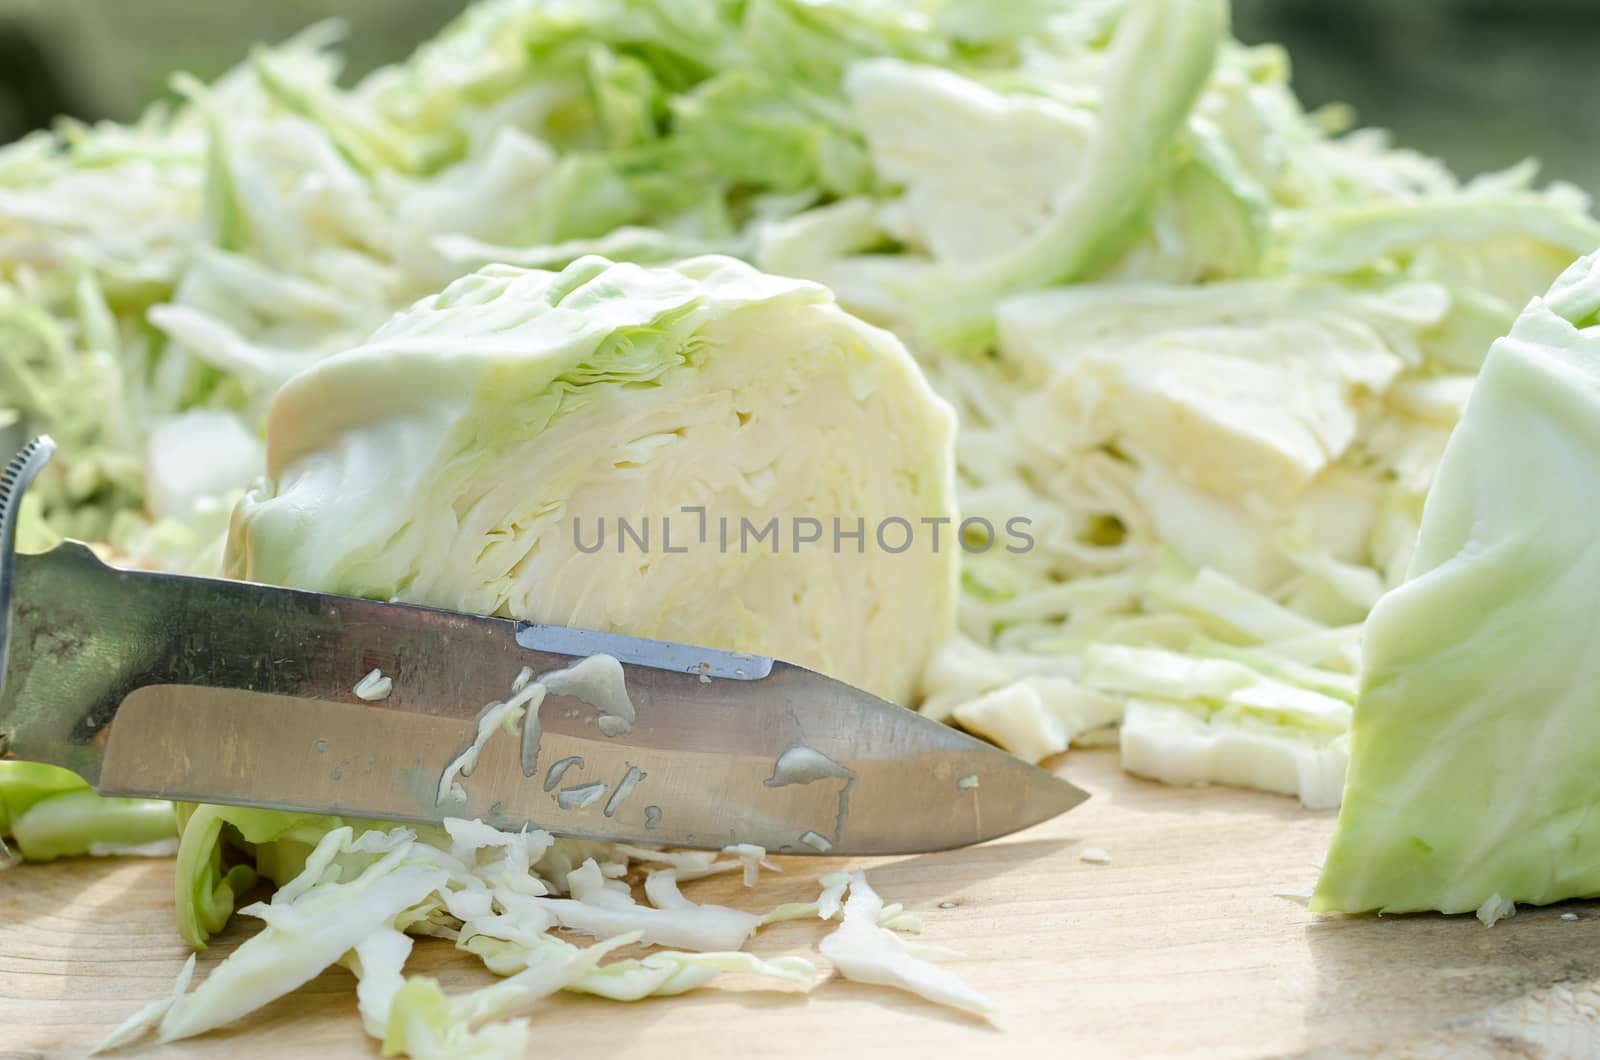 Slice the cabbage with a knife for rough cutting Board. Ingredients for cooking outdoors